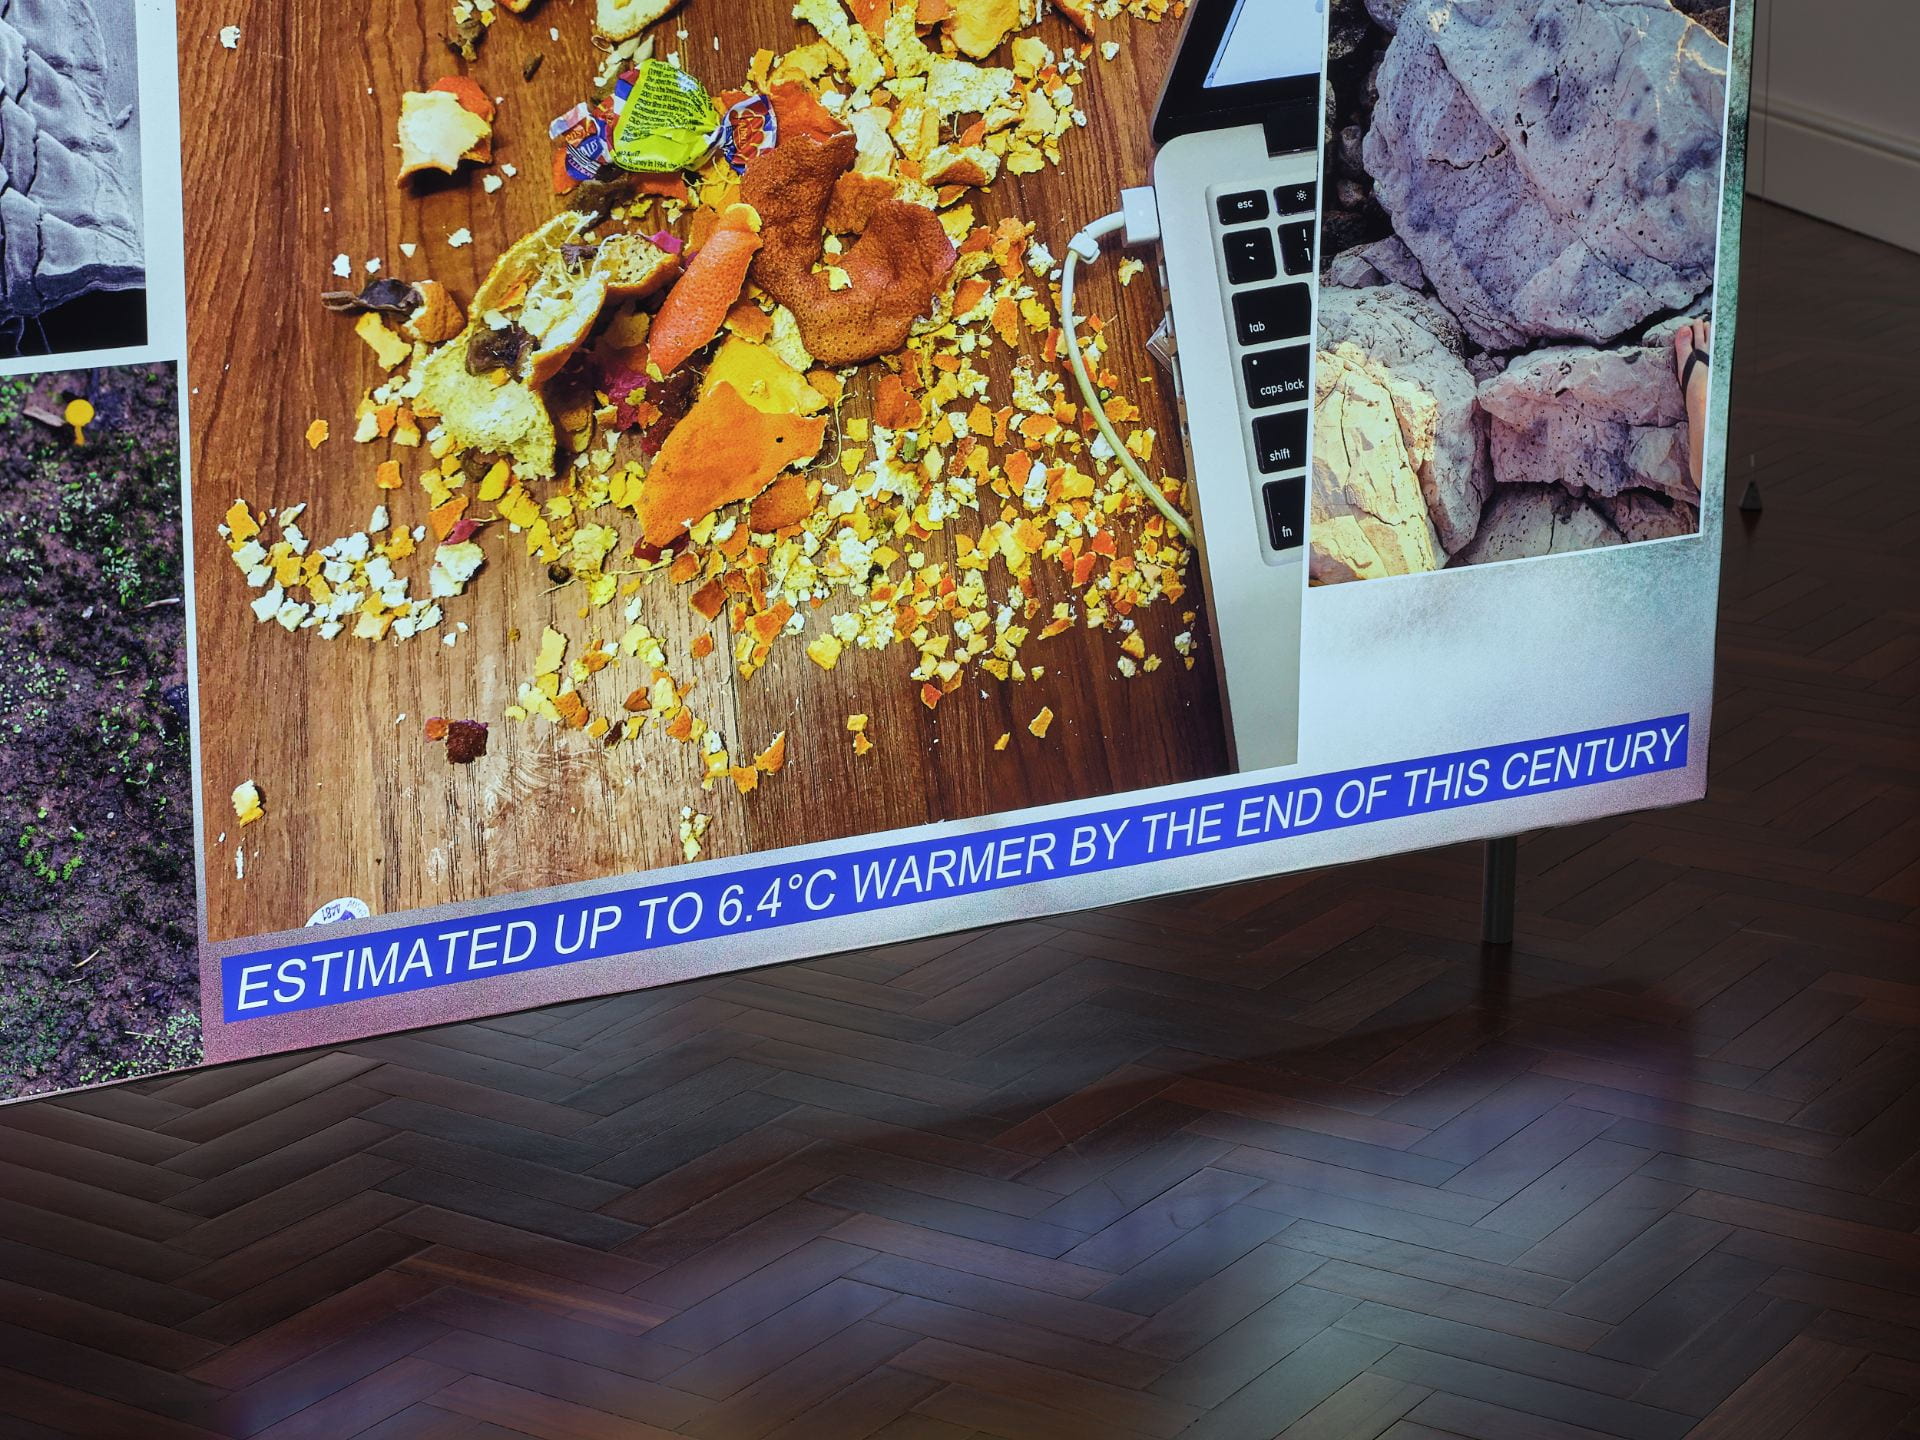 Close up of a lightbox. The lightbox has a series of jumbled pictures on it. The visible one is of a laptop with shredded mandarin peels and rubbish next to it, while some text below reads 'Estimated up to 6.4 degrees Celsius warmer by the end of this century'.